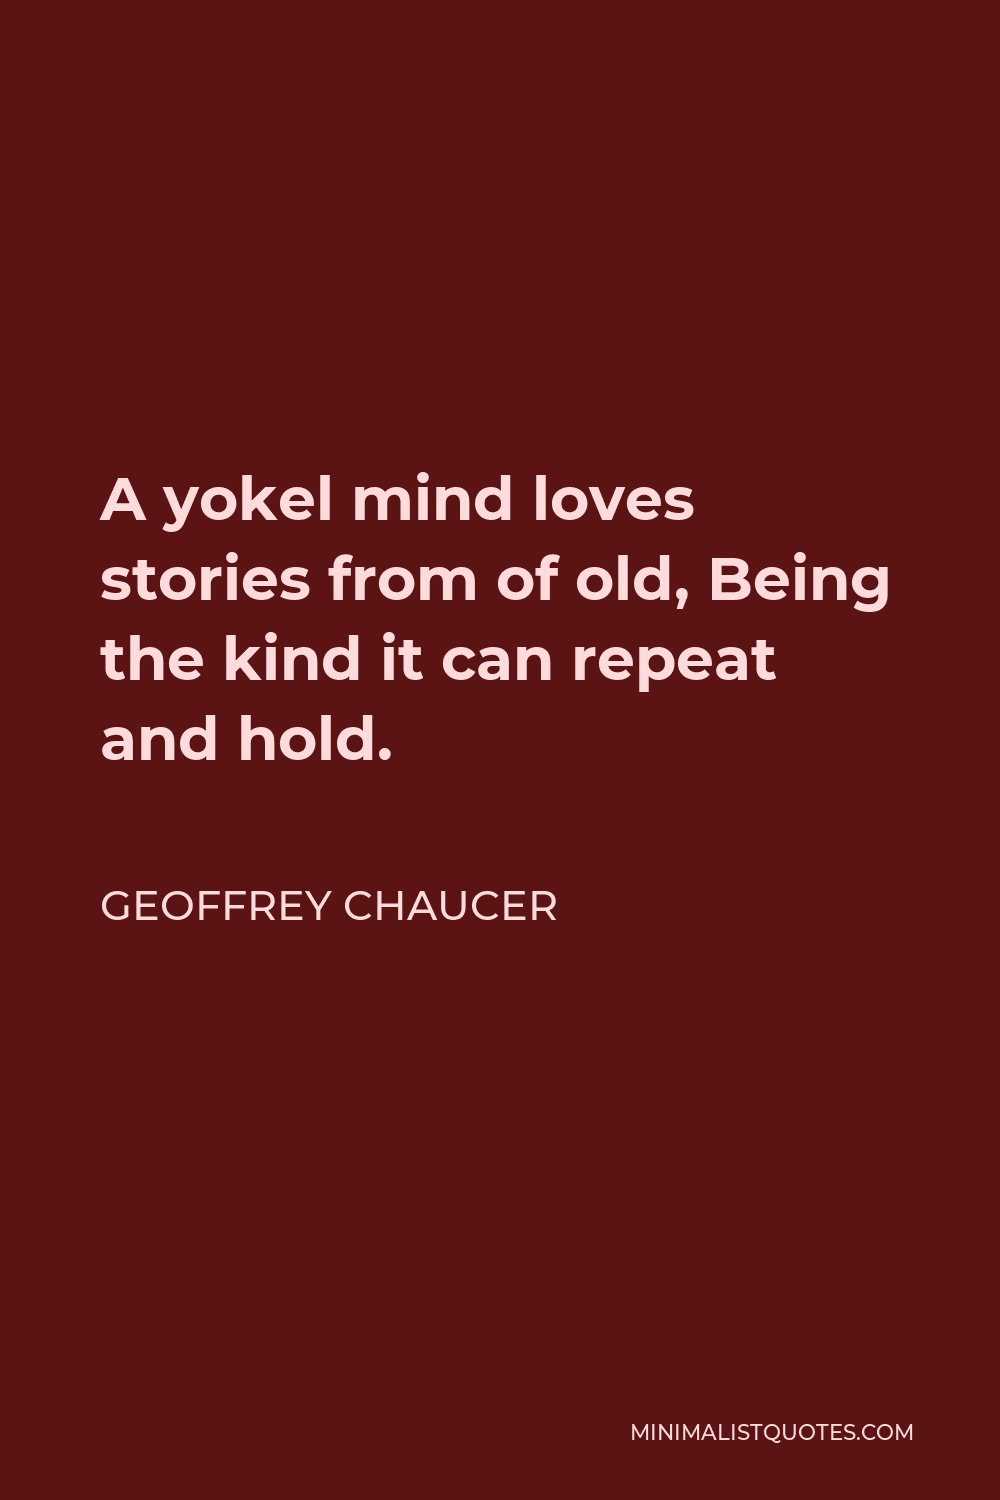 Geoffrey Chaucer Quote - A yokel mind loves stories from of old, Being the kind it can repeat and hold.